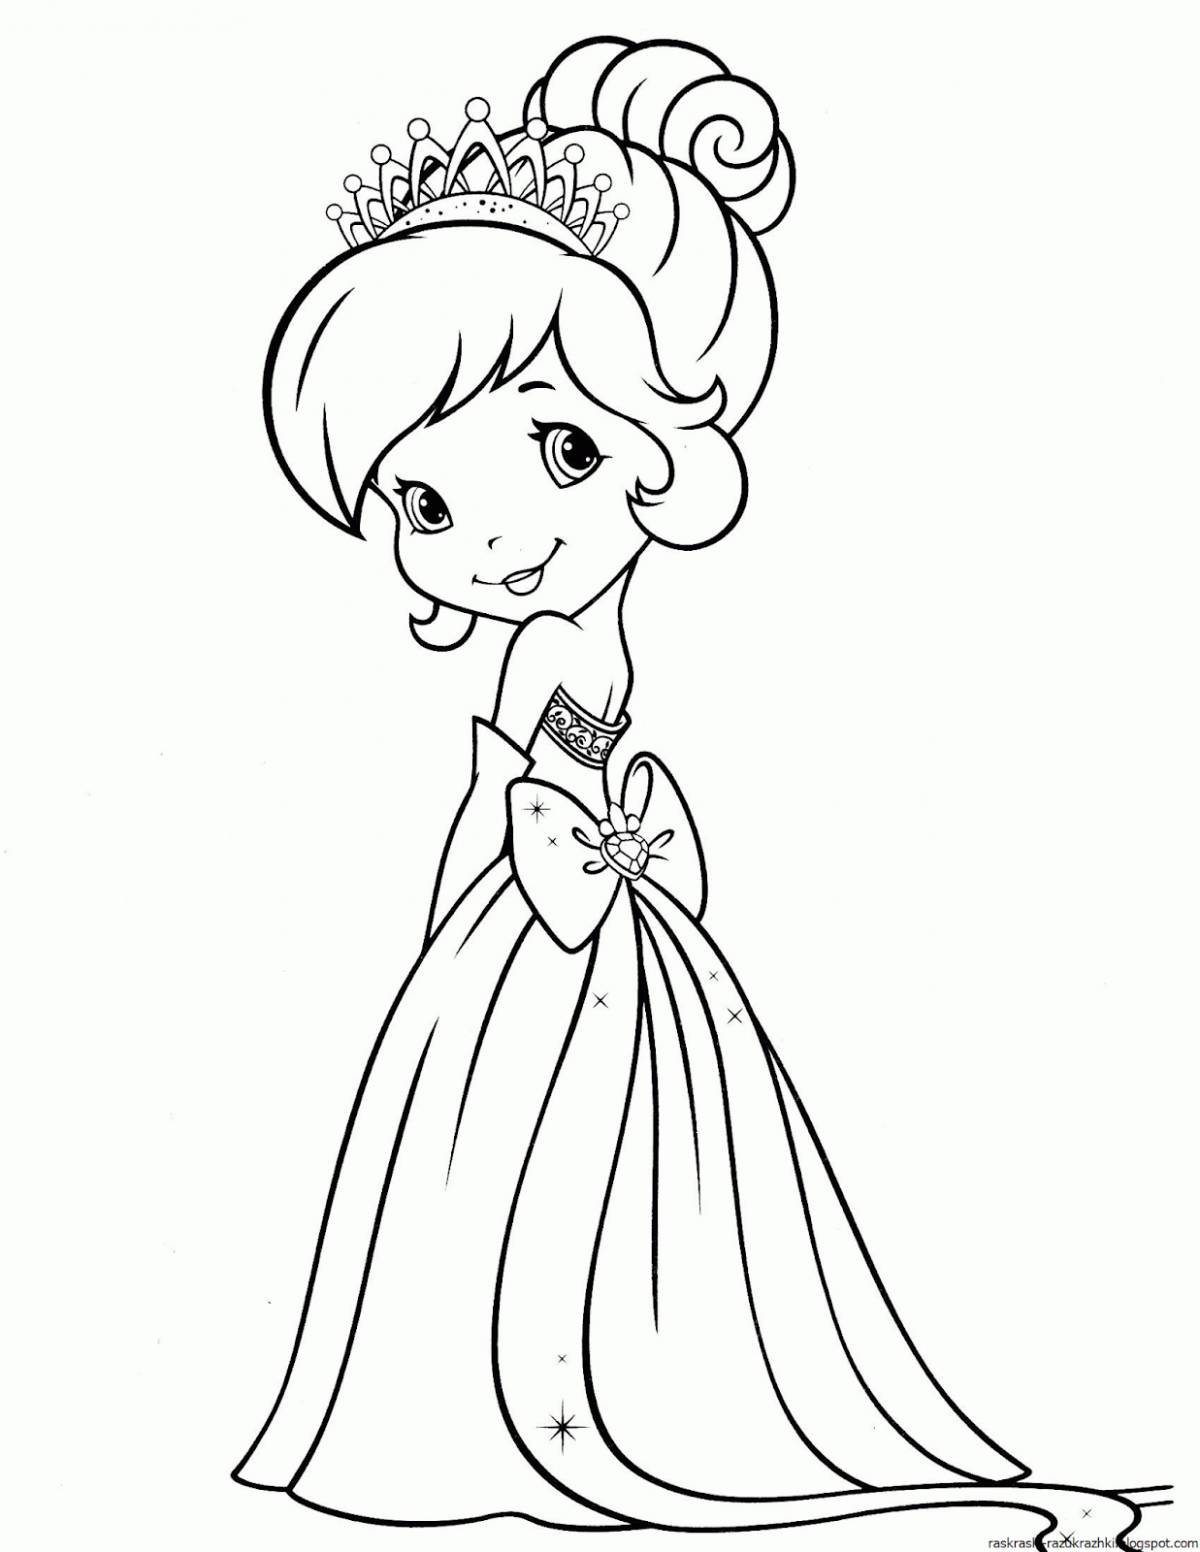 Exquisite coloring princess for children 3-4 years old